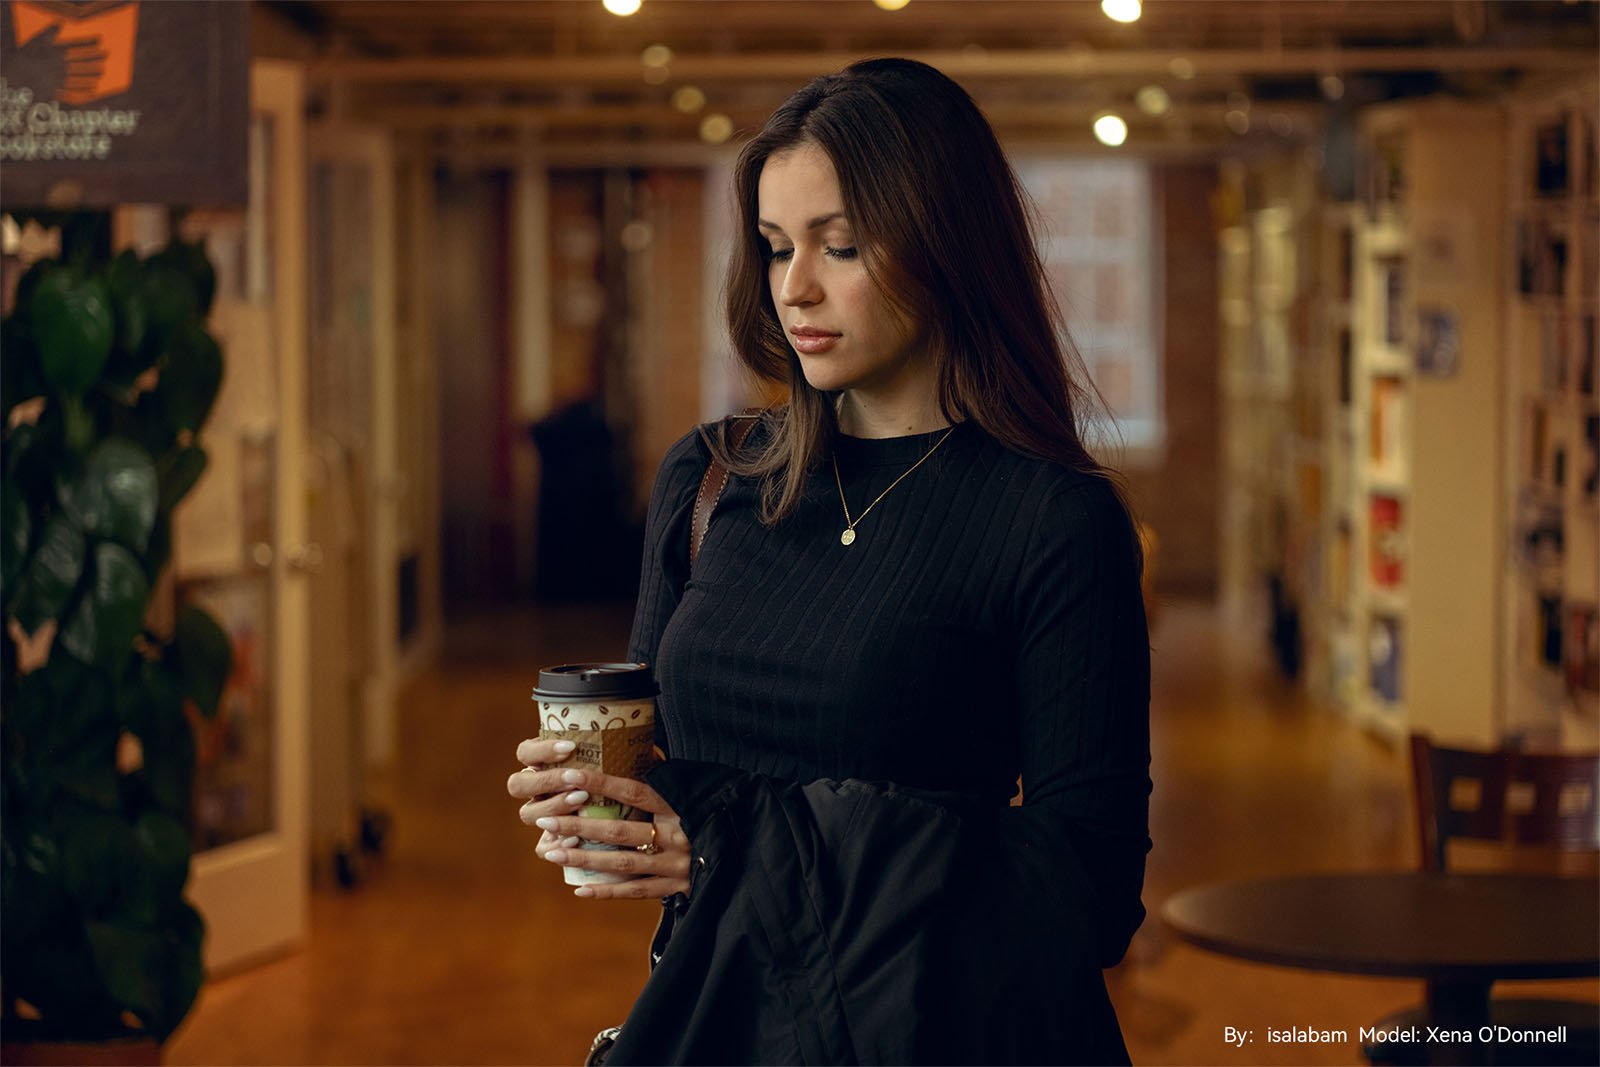 A woman in a black sweater holds a coffee cup and a jacket inside a warmly lit cafe with blurred background showcasing indoor plants and hanging lights.